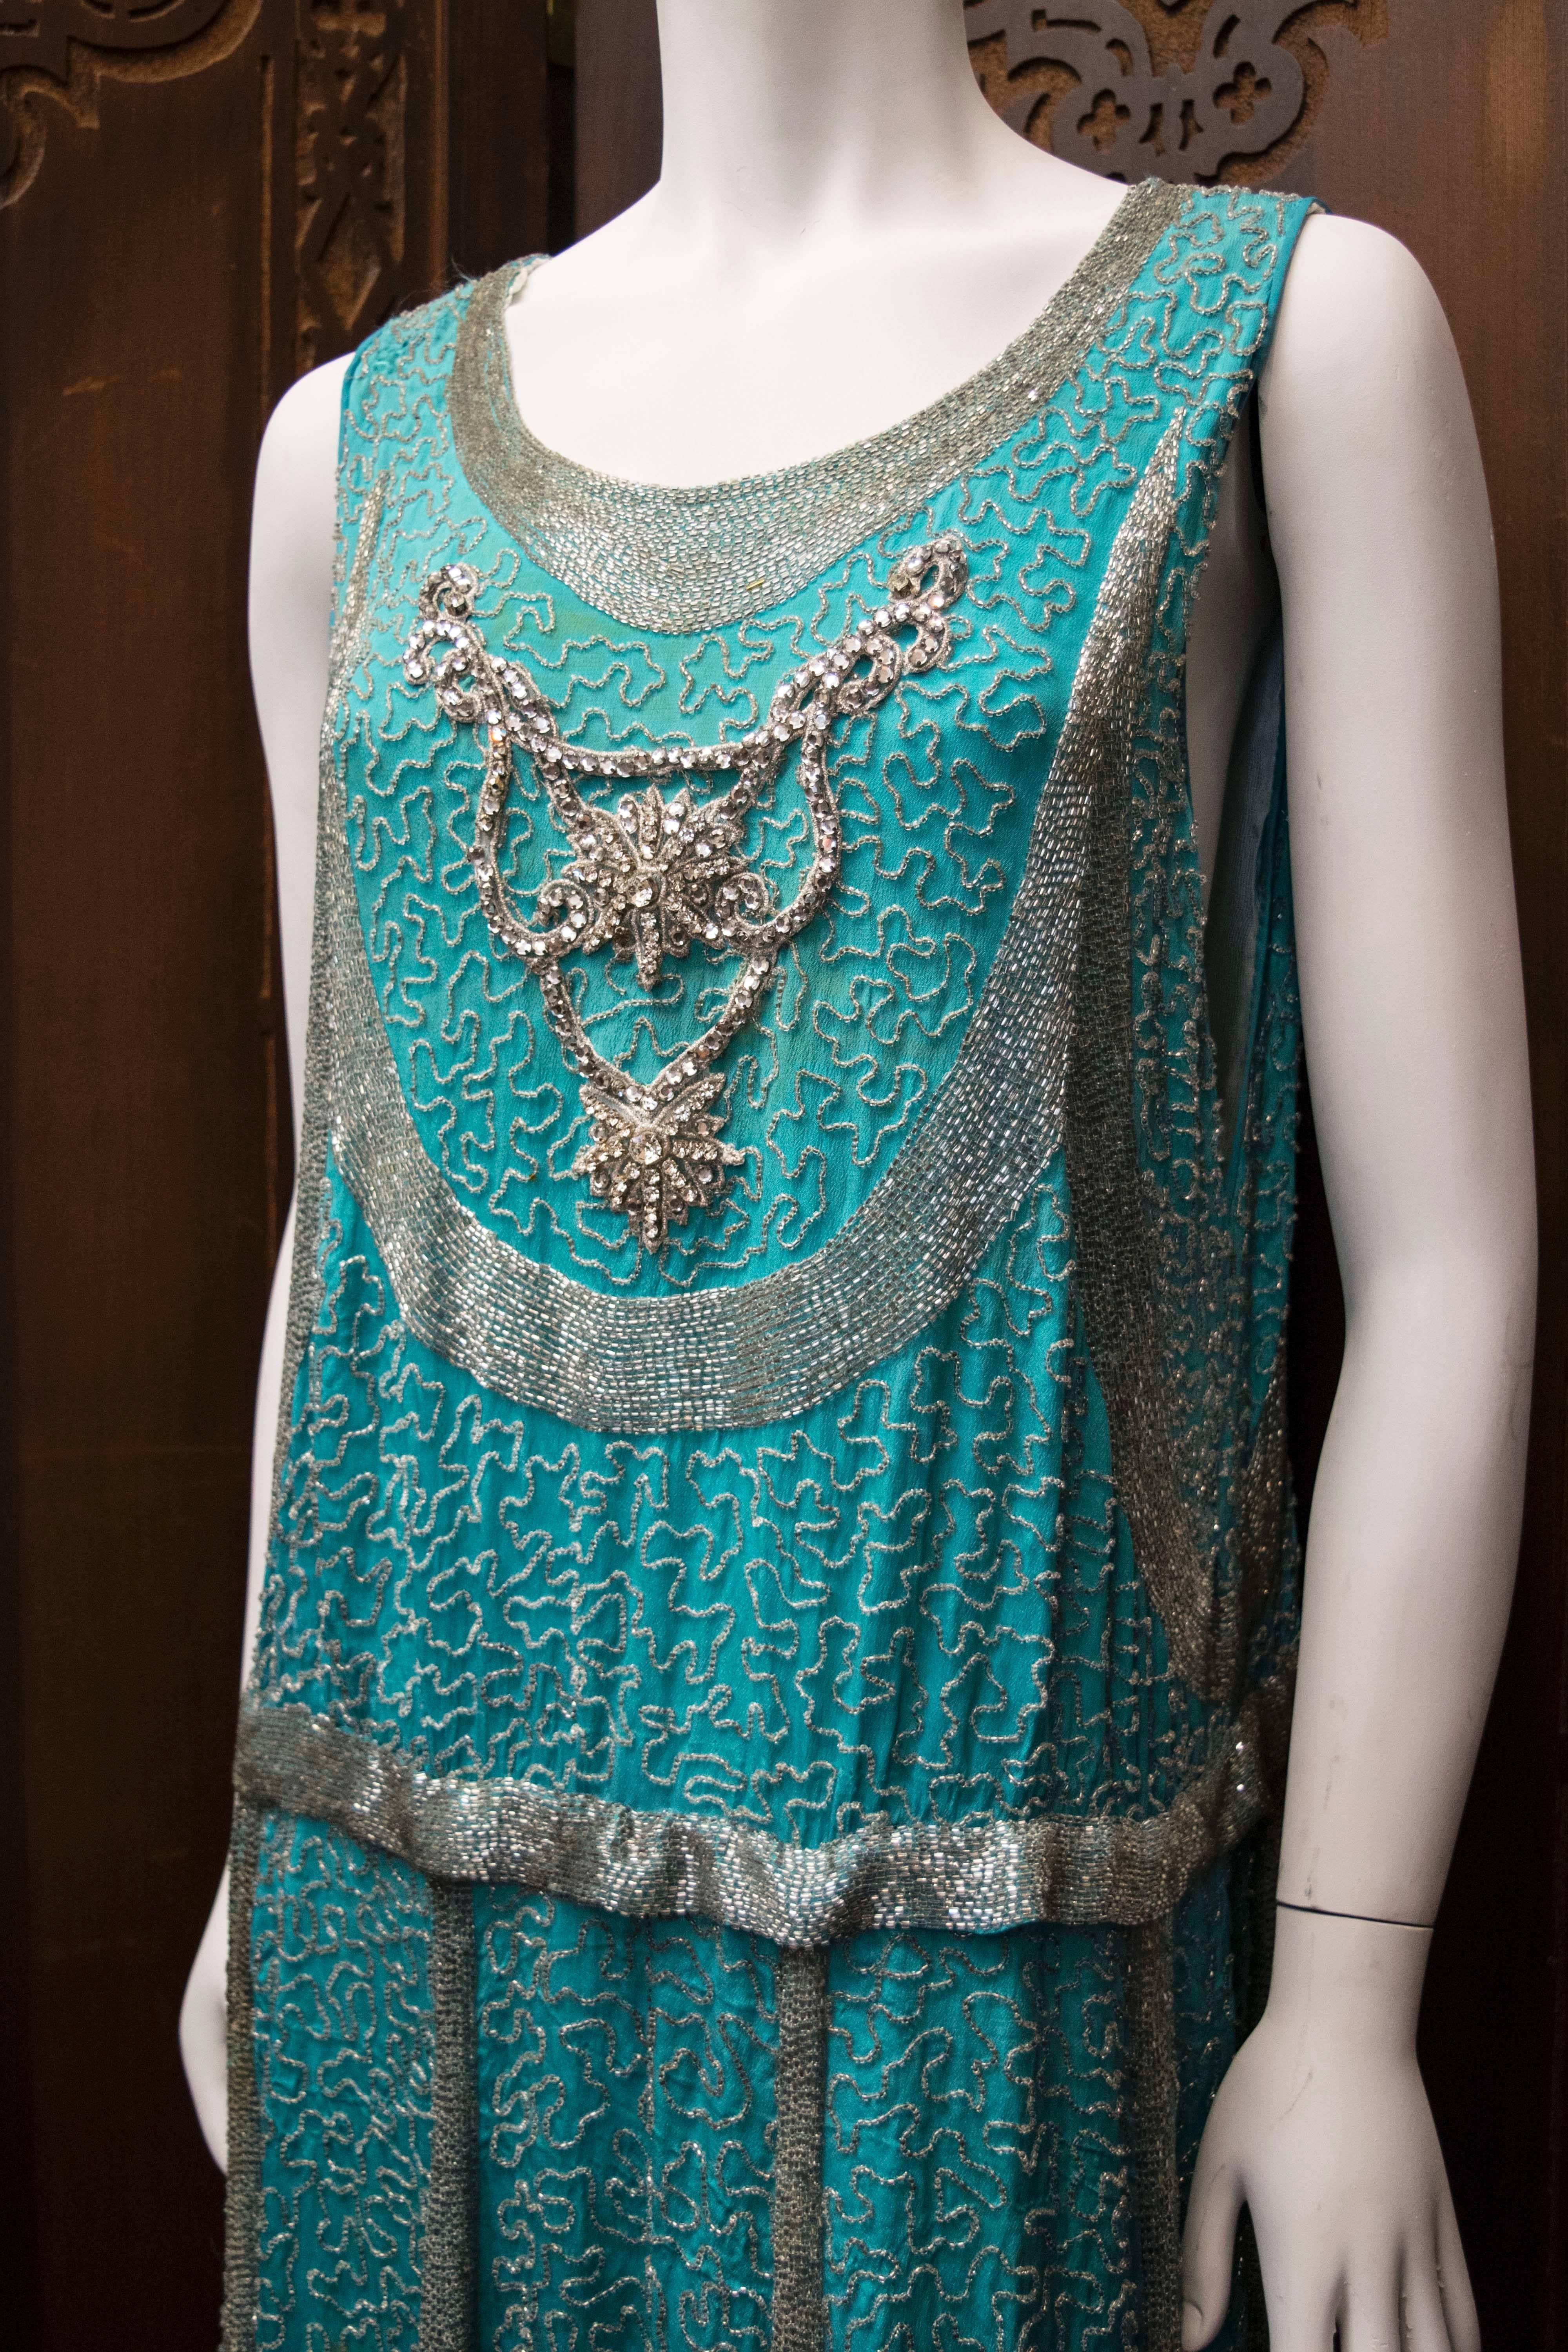 1920s Beaded Aqua Flapper Dress.
A unique and rare coloured 1920s dress, hand beaded with beautiful silver bugle  beads. There is an a-symetircal, scalloped hem with a wonderful weight and movement. It has a replacement interior scaffolding which